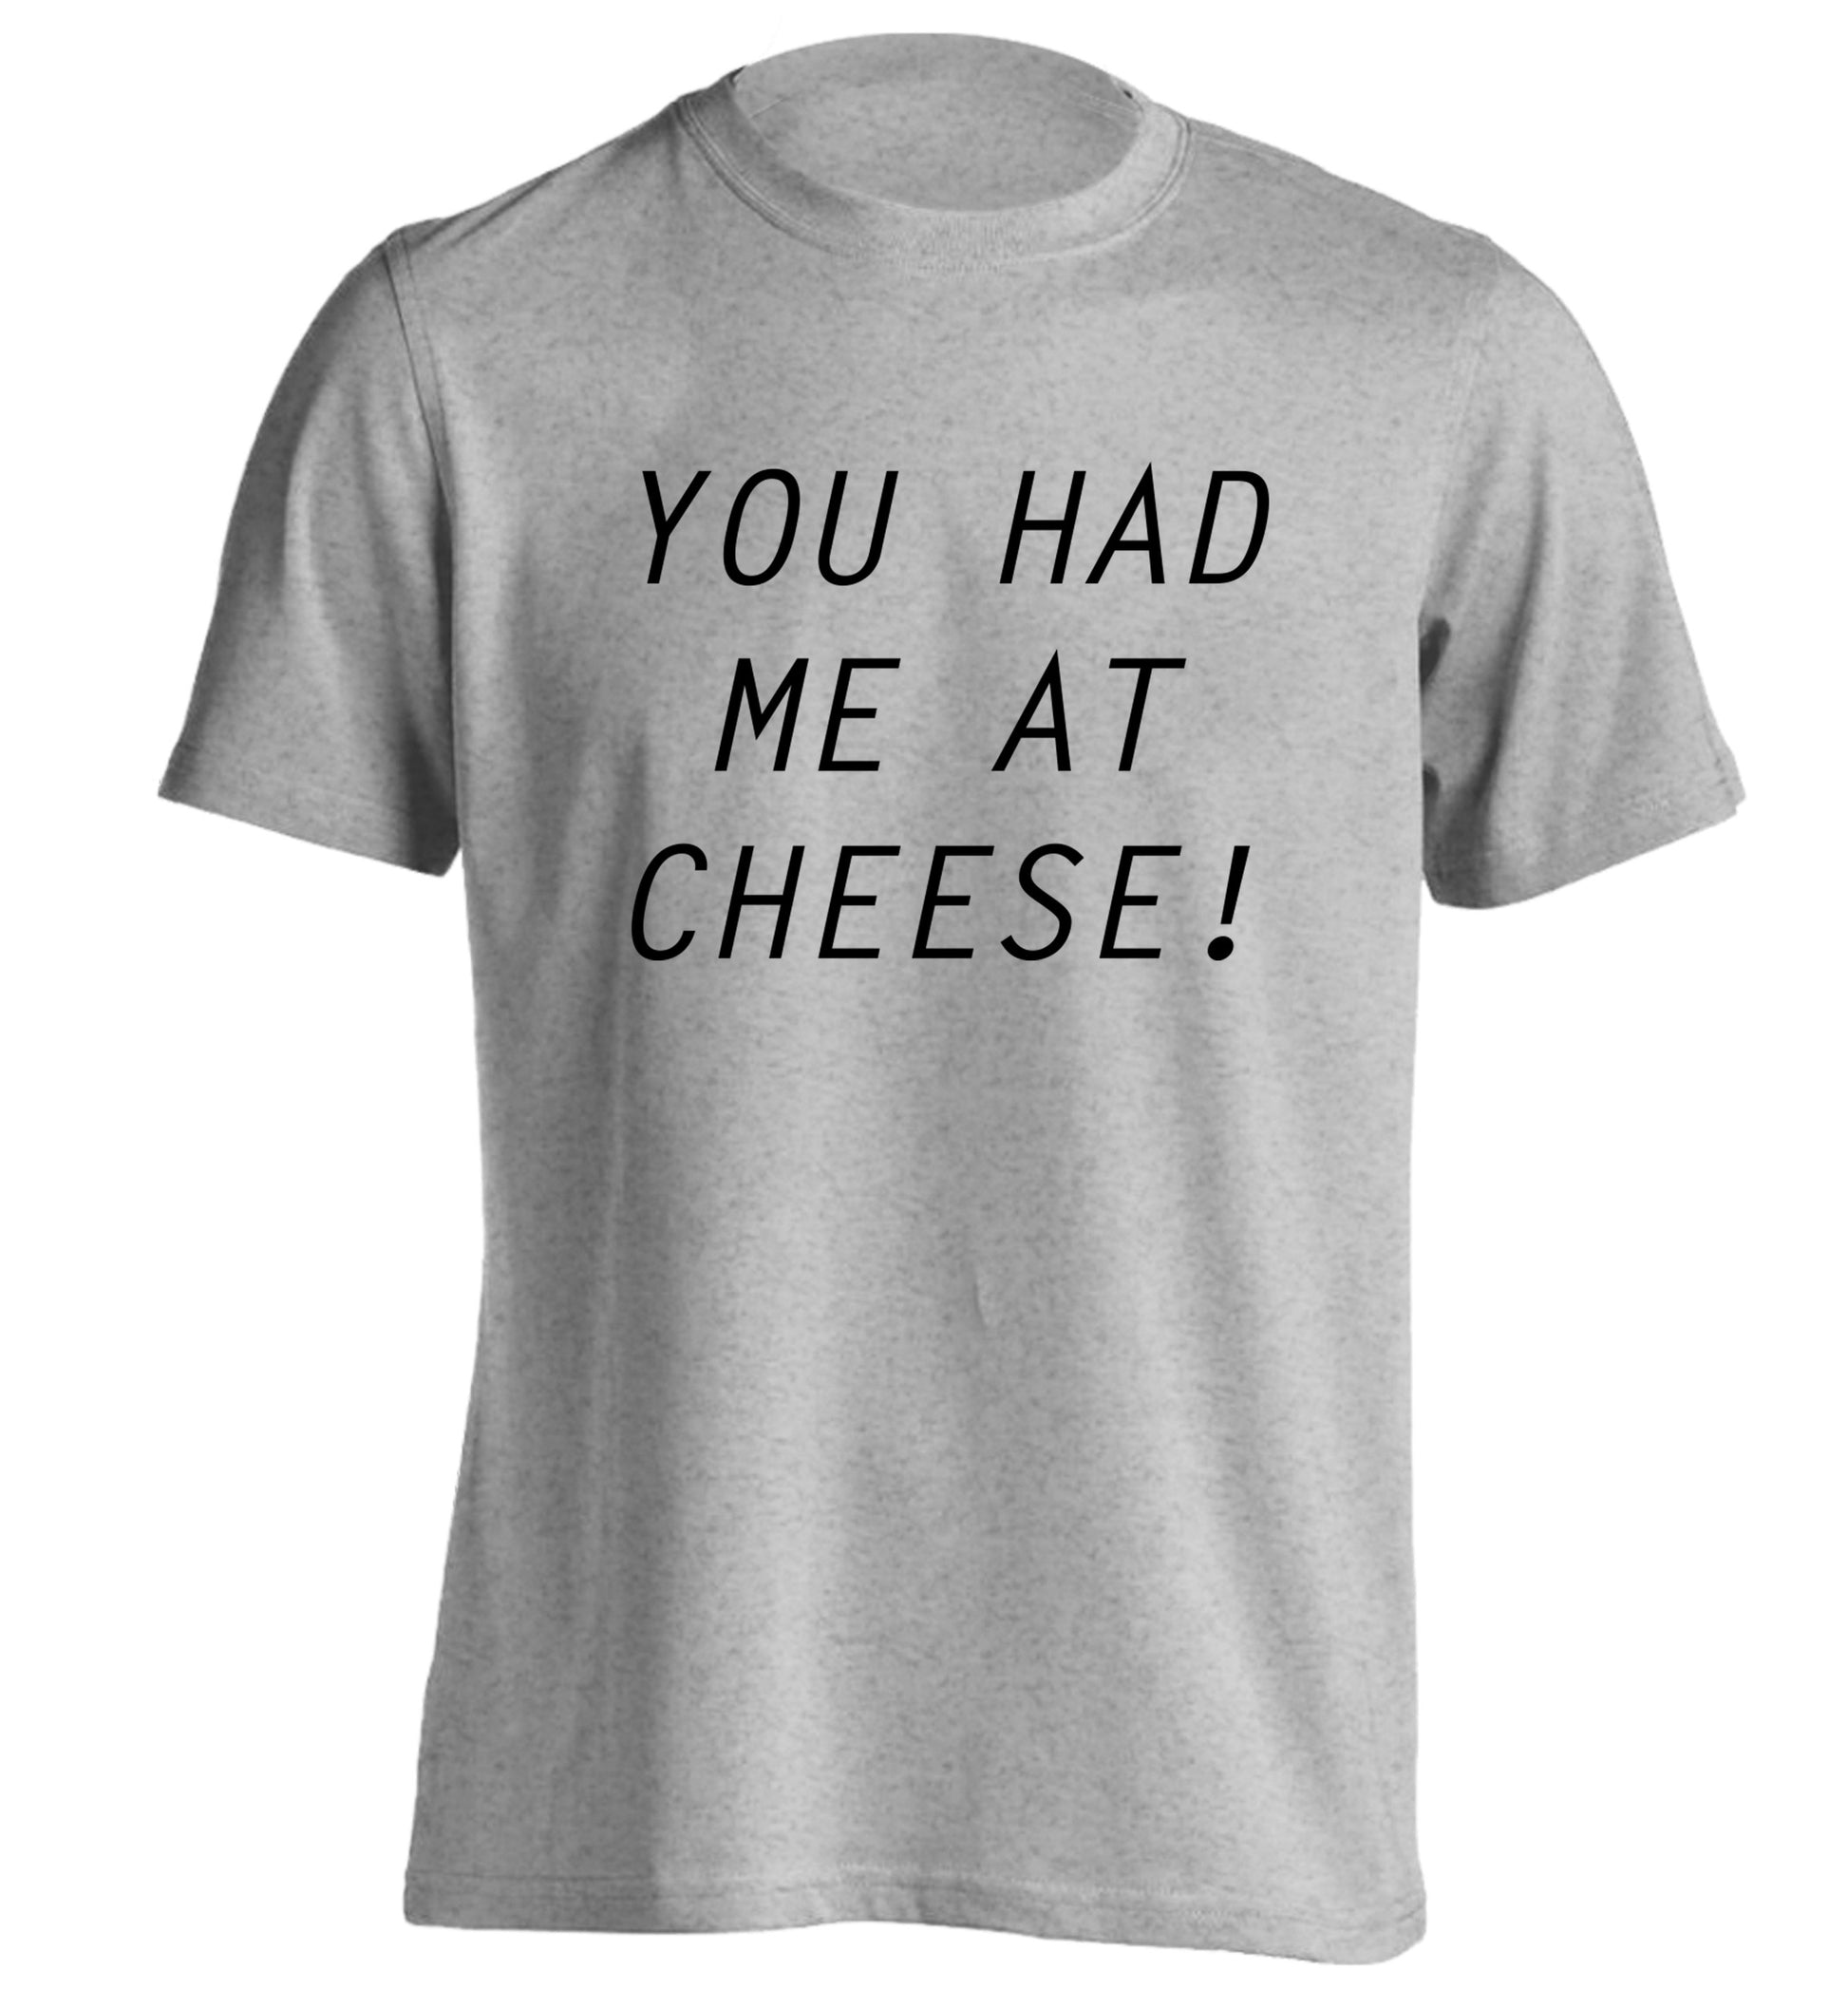 You had me at cheese adults unisex grey Tshirt 2XL